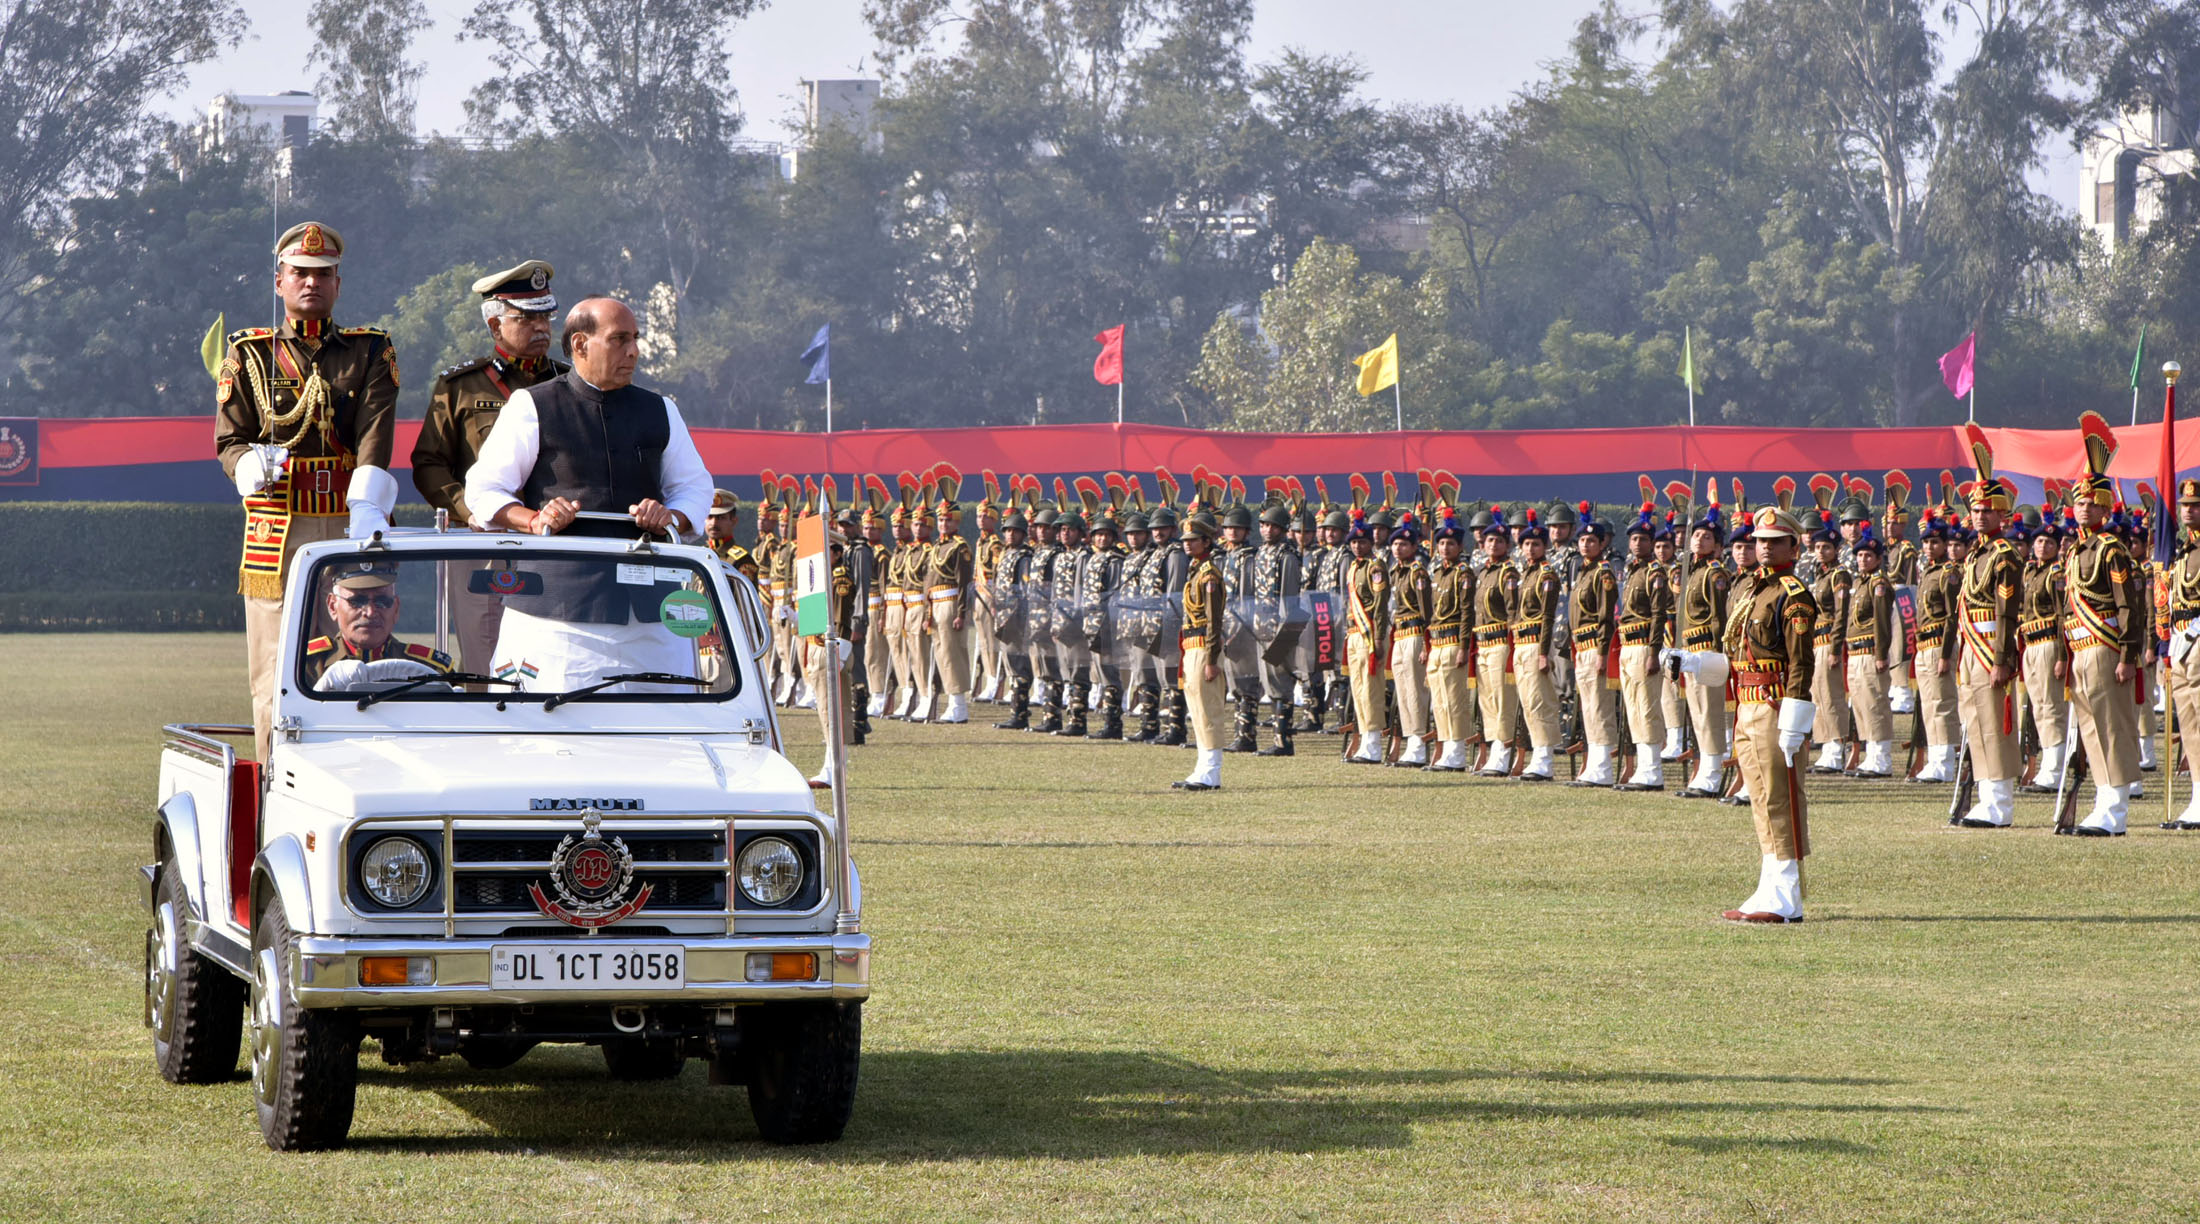 The Union Home Minister, Shri Rajnath Singh inspecting the parade on the occasion of 69th Raising Day function of Delhi Police, in New Delhi on February 16, 2016.  	The Police Commissioner of Delhi, Shri B.S. Bassi is also seen.